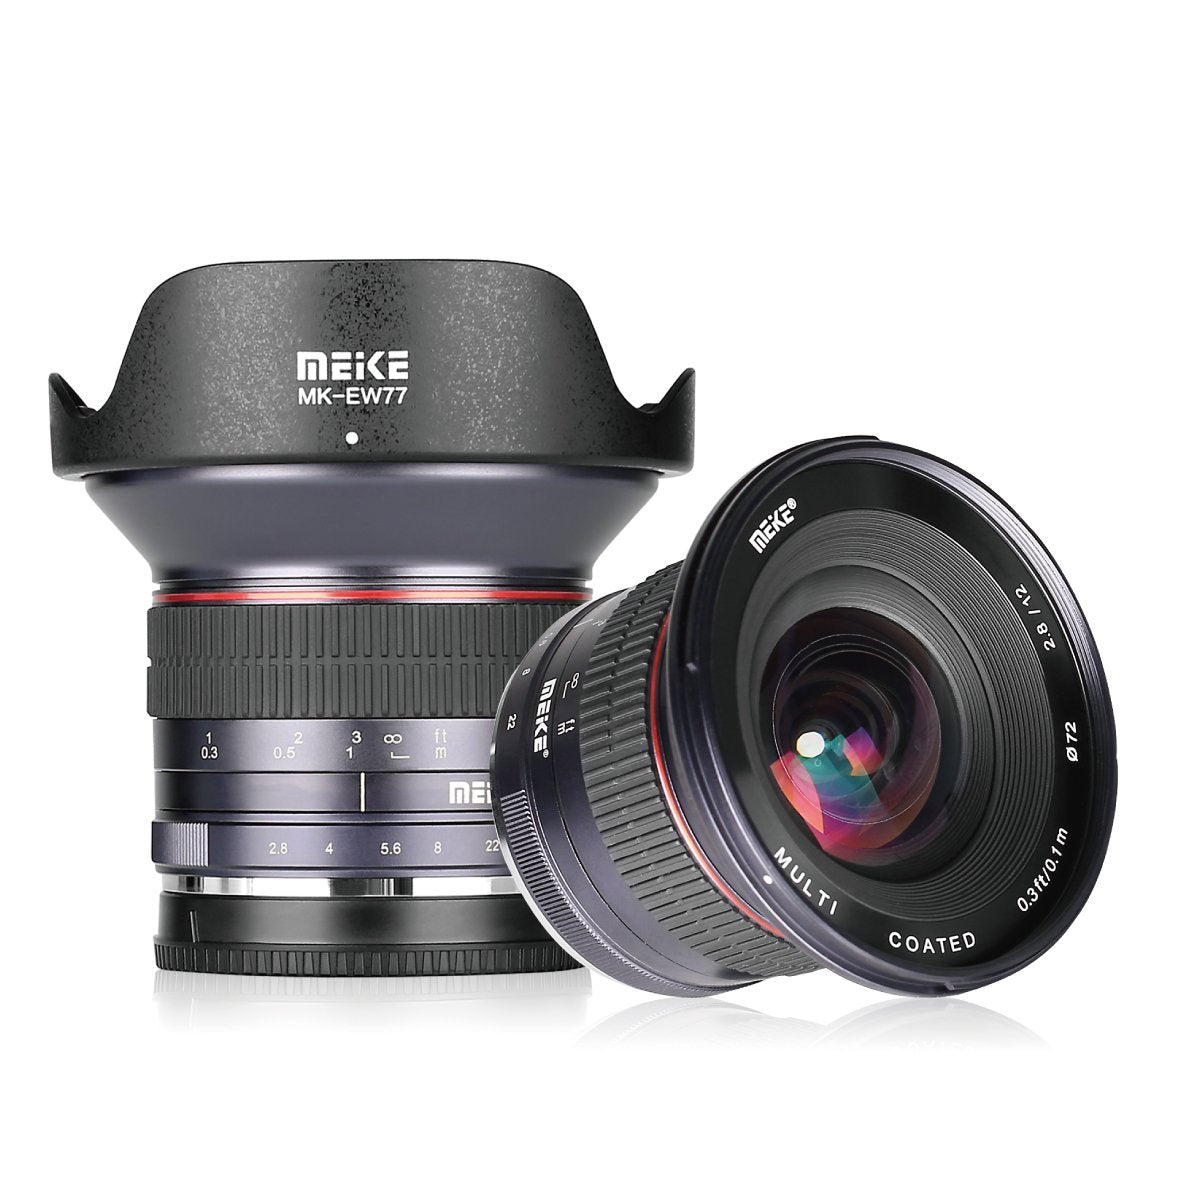 Meike MK-12mm 12mm f/2.8 Ultra Wide Angle Manual Fixed Lens for MFT Micro Four Thirds Panasonic Olympus Mirrorless Camera